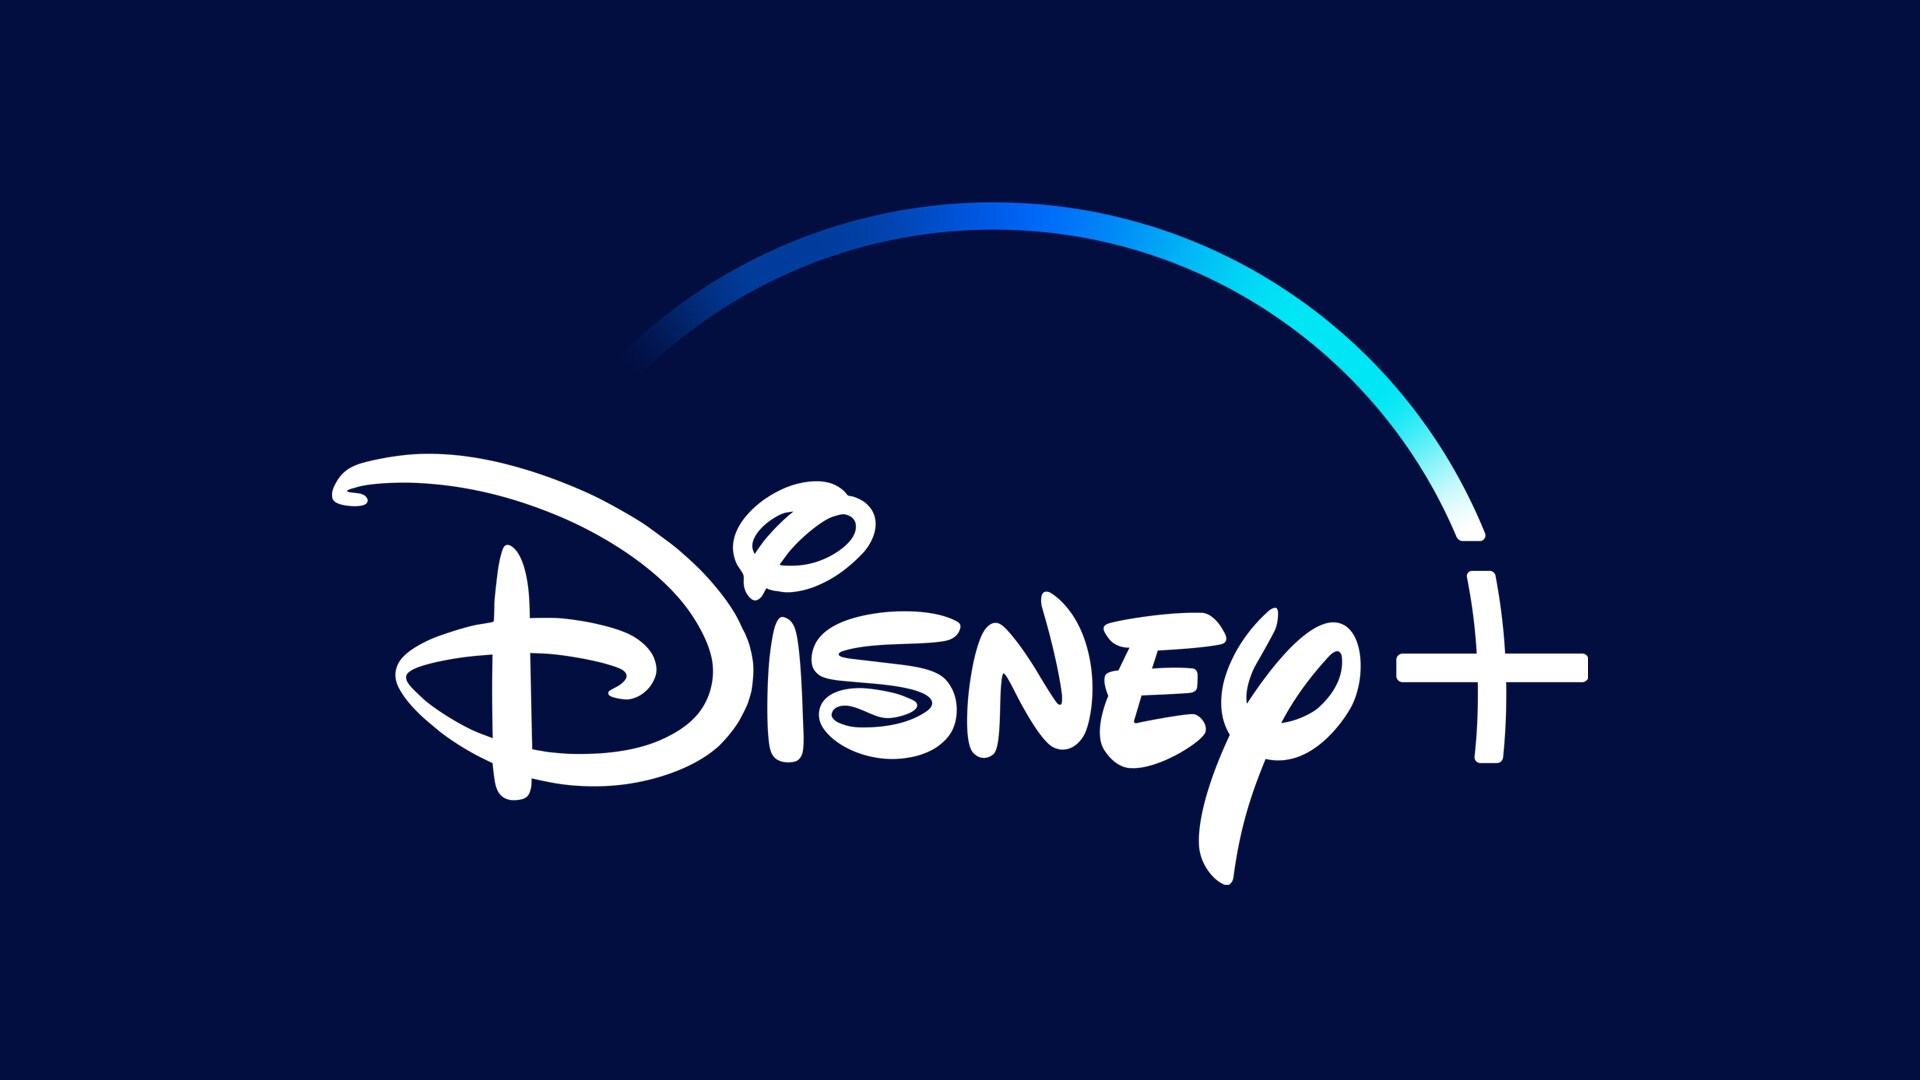 Disney+ To Debut 27 Newly Restored Walt Disney Animation Studios Classic Shorts Starting On July 7 To Celebrate Disney’s 100th Anniversary